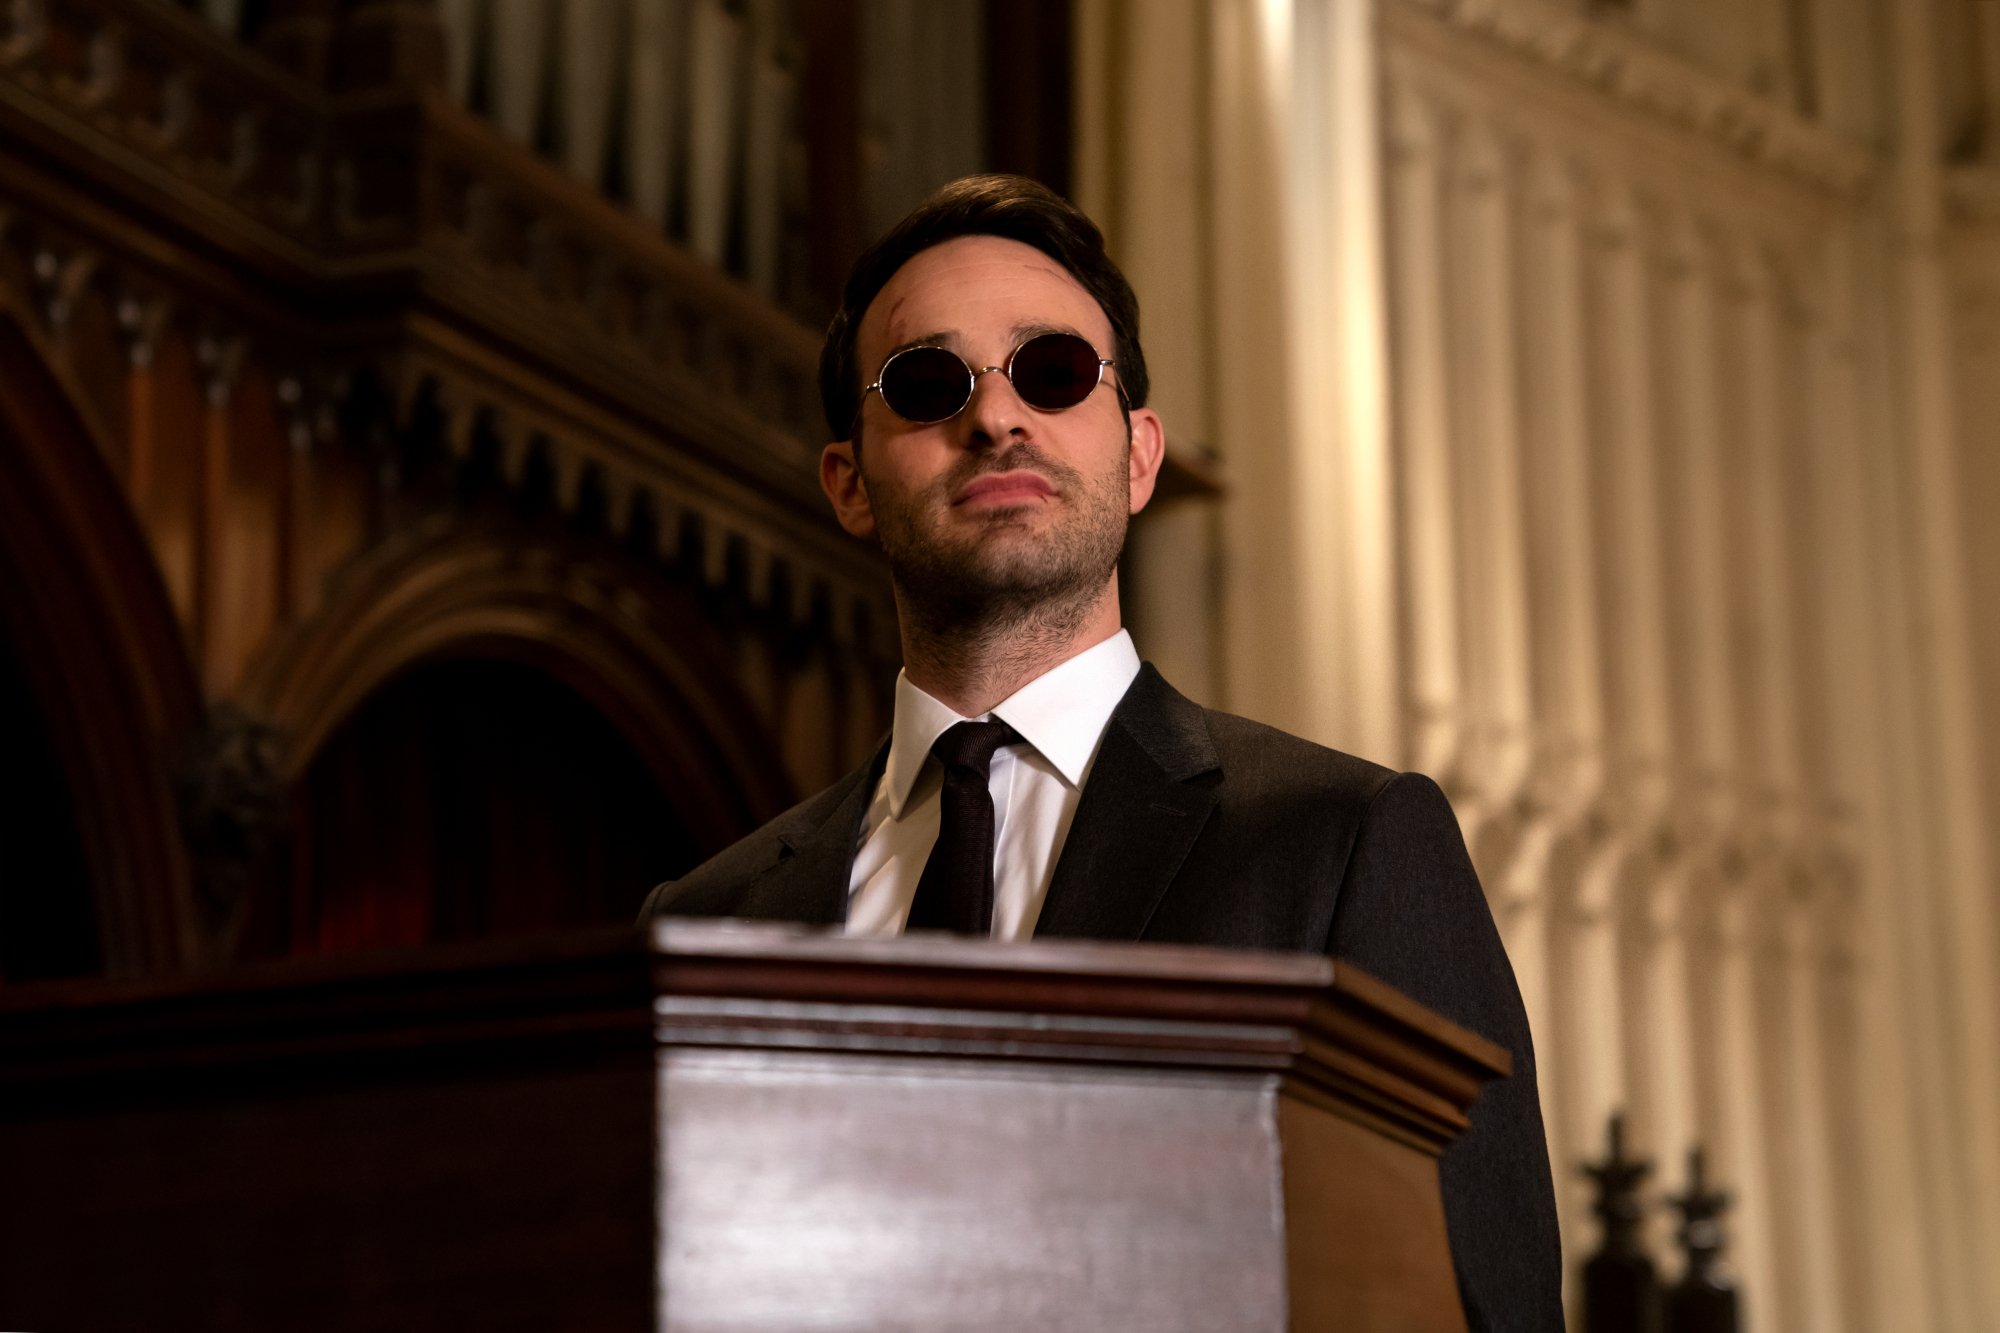 Charlie Cox as Matt Murdock/Daredevil in Netflix's 'Daredevil' series. He's wearing a suit and standing at a podium. He has dark glasses on.